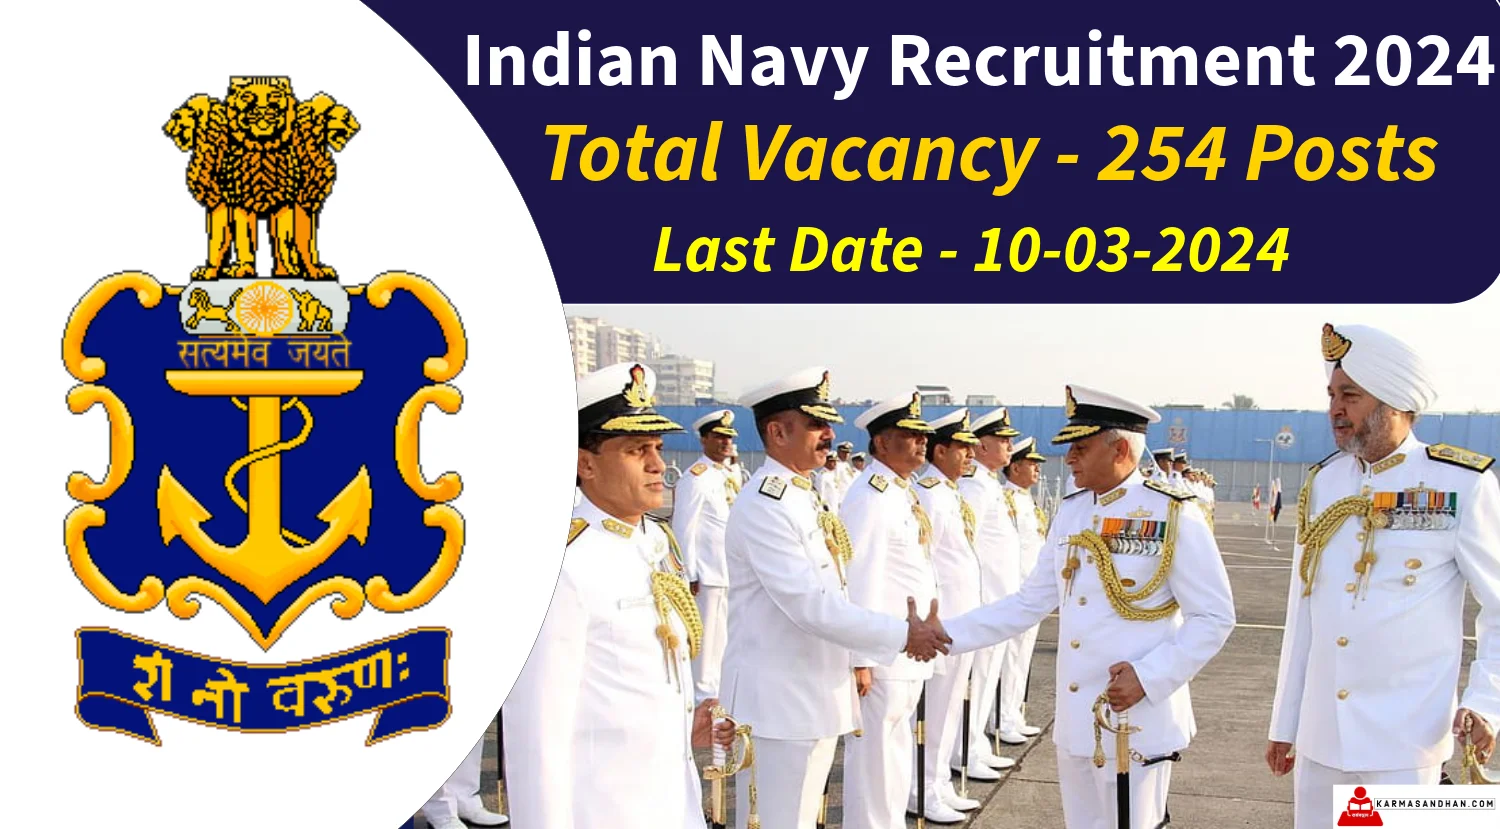 Indian Navy SSC Officers Recruitment 2024 Notification Out for 254 Posts